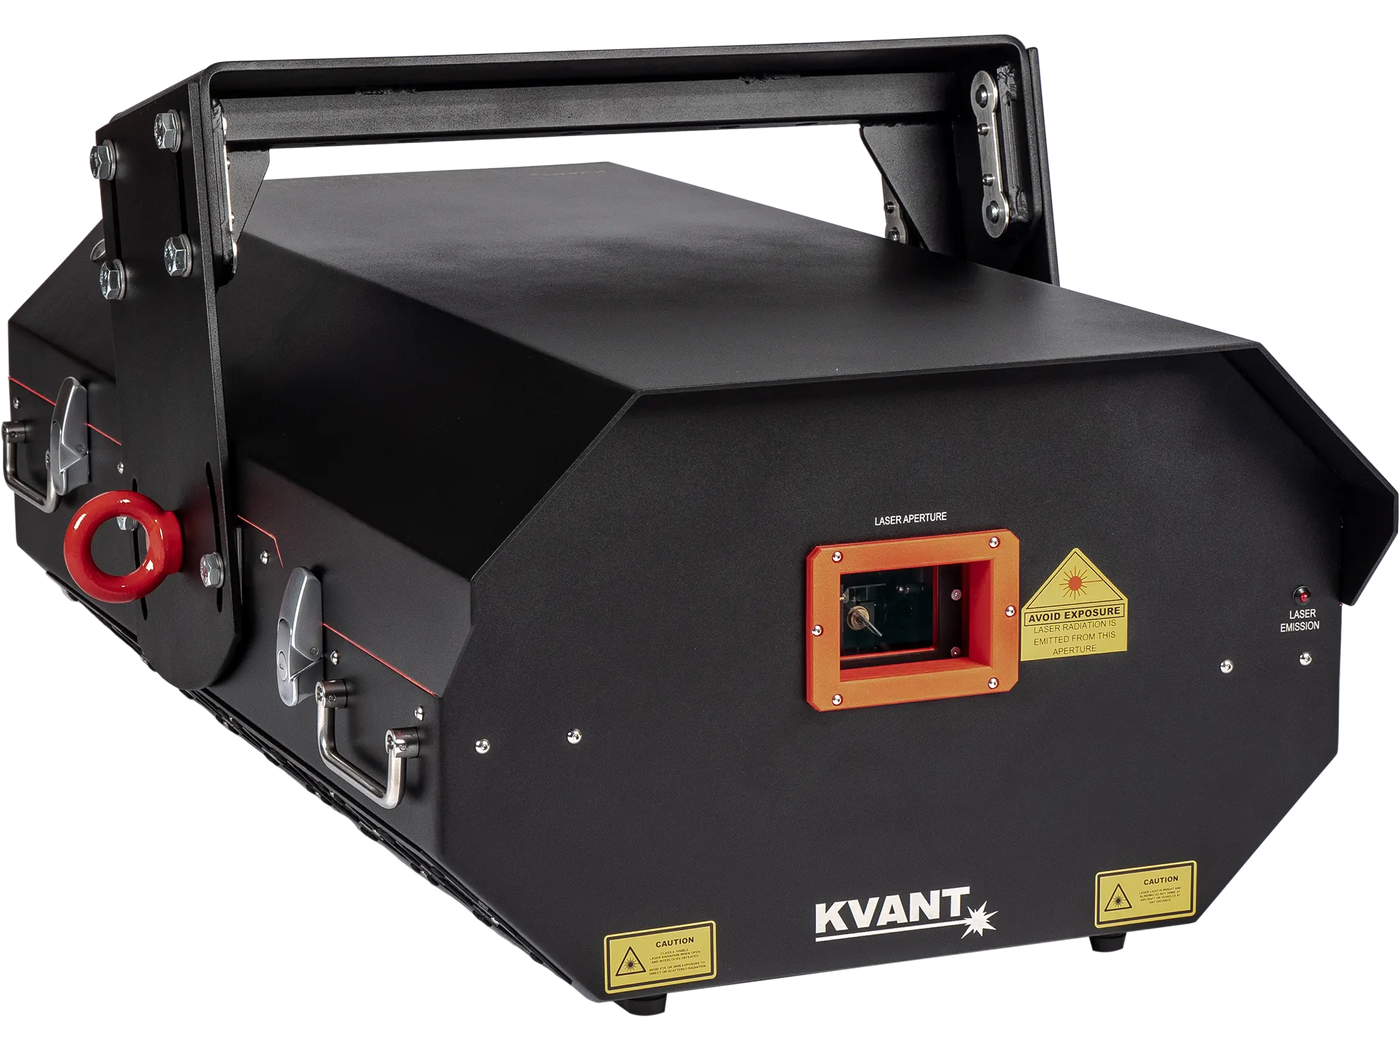 KVANT Epic high-powered outdoor laser show projector